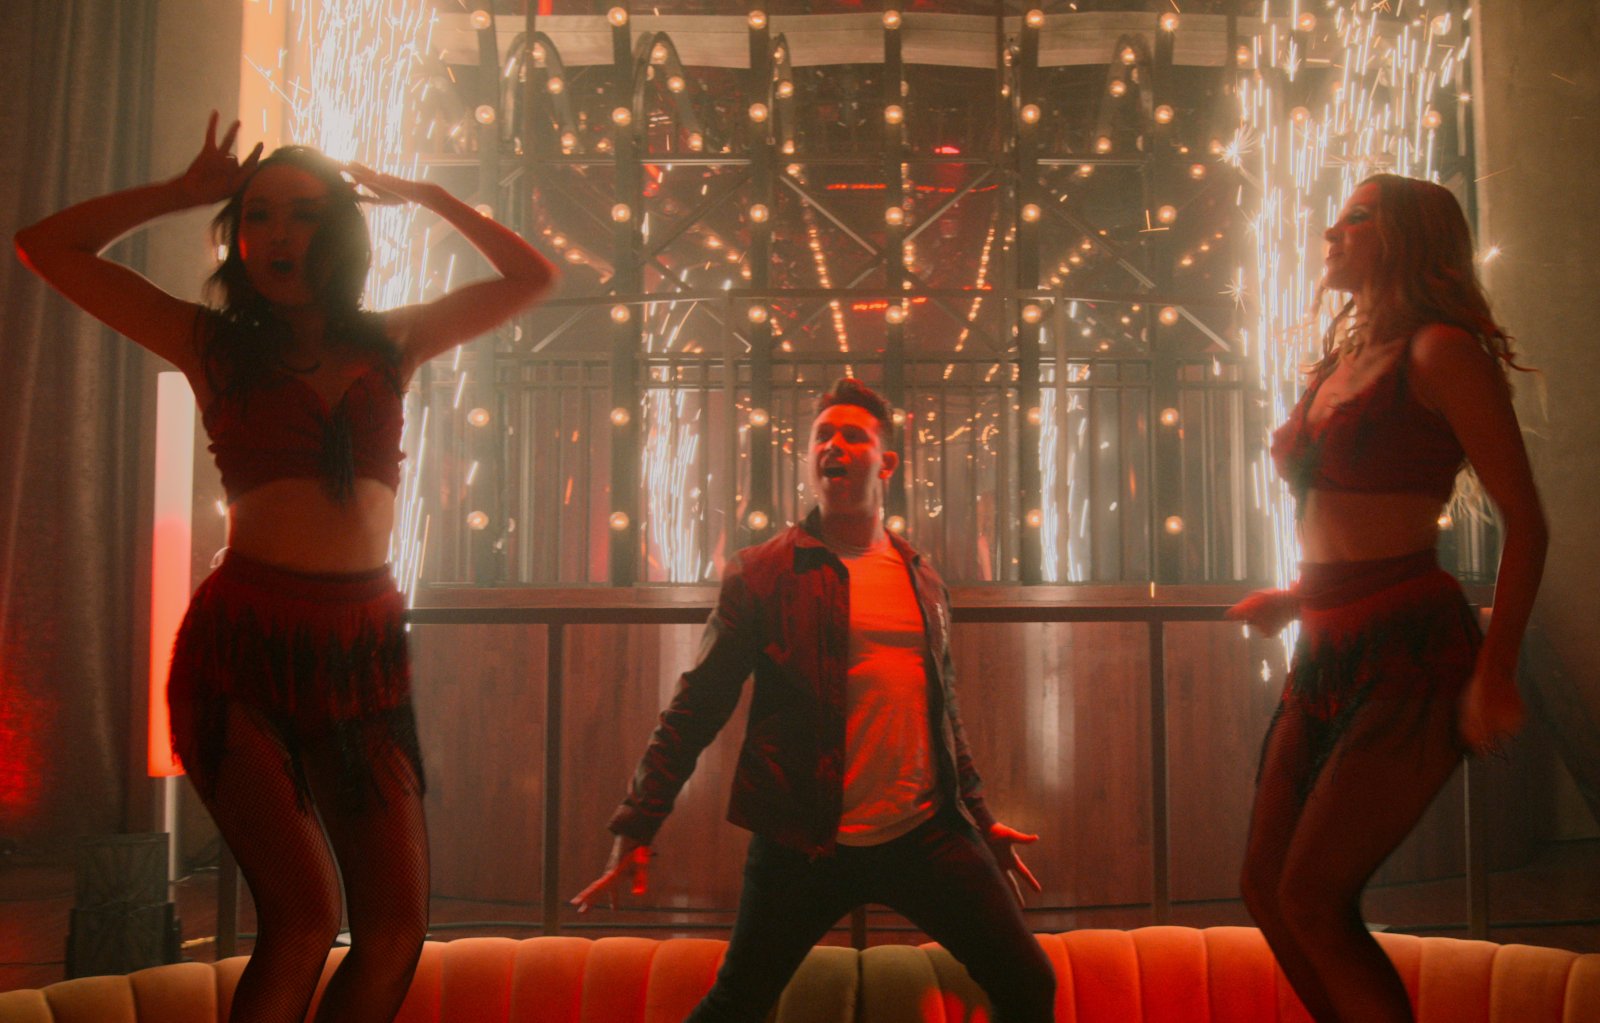 A musical moment from 'Lucifer' Season 5 Episode 10. Dan (Kevin Alejandro) is dancing, as are two women on either side of him.